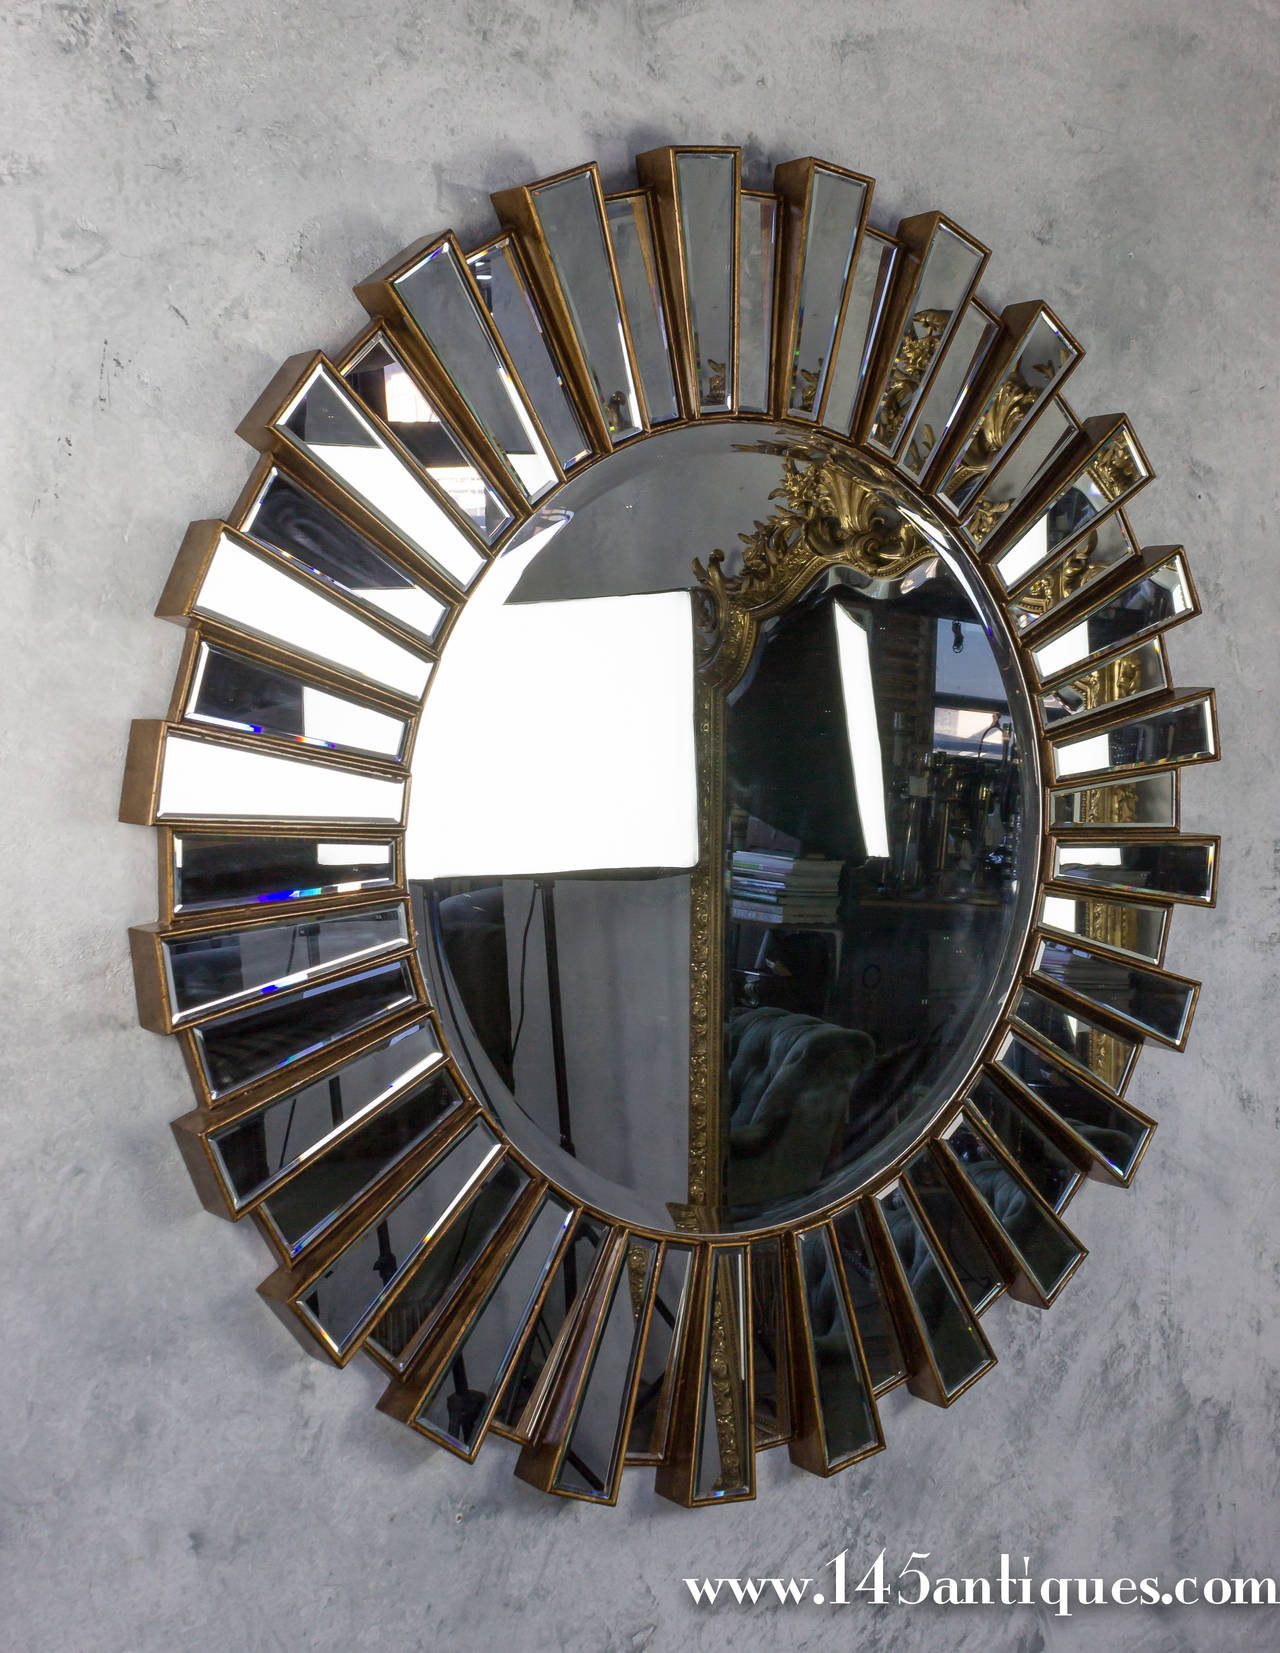 Very large round sunburst mirror with interlocking tiers and bevel mirror in center and outer ring. Contemporary.